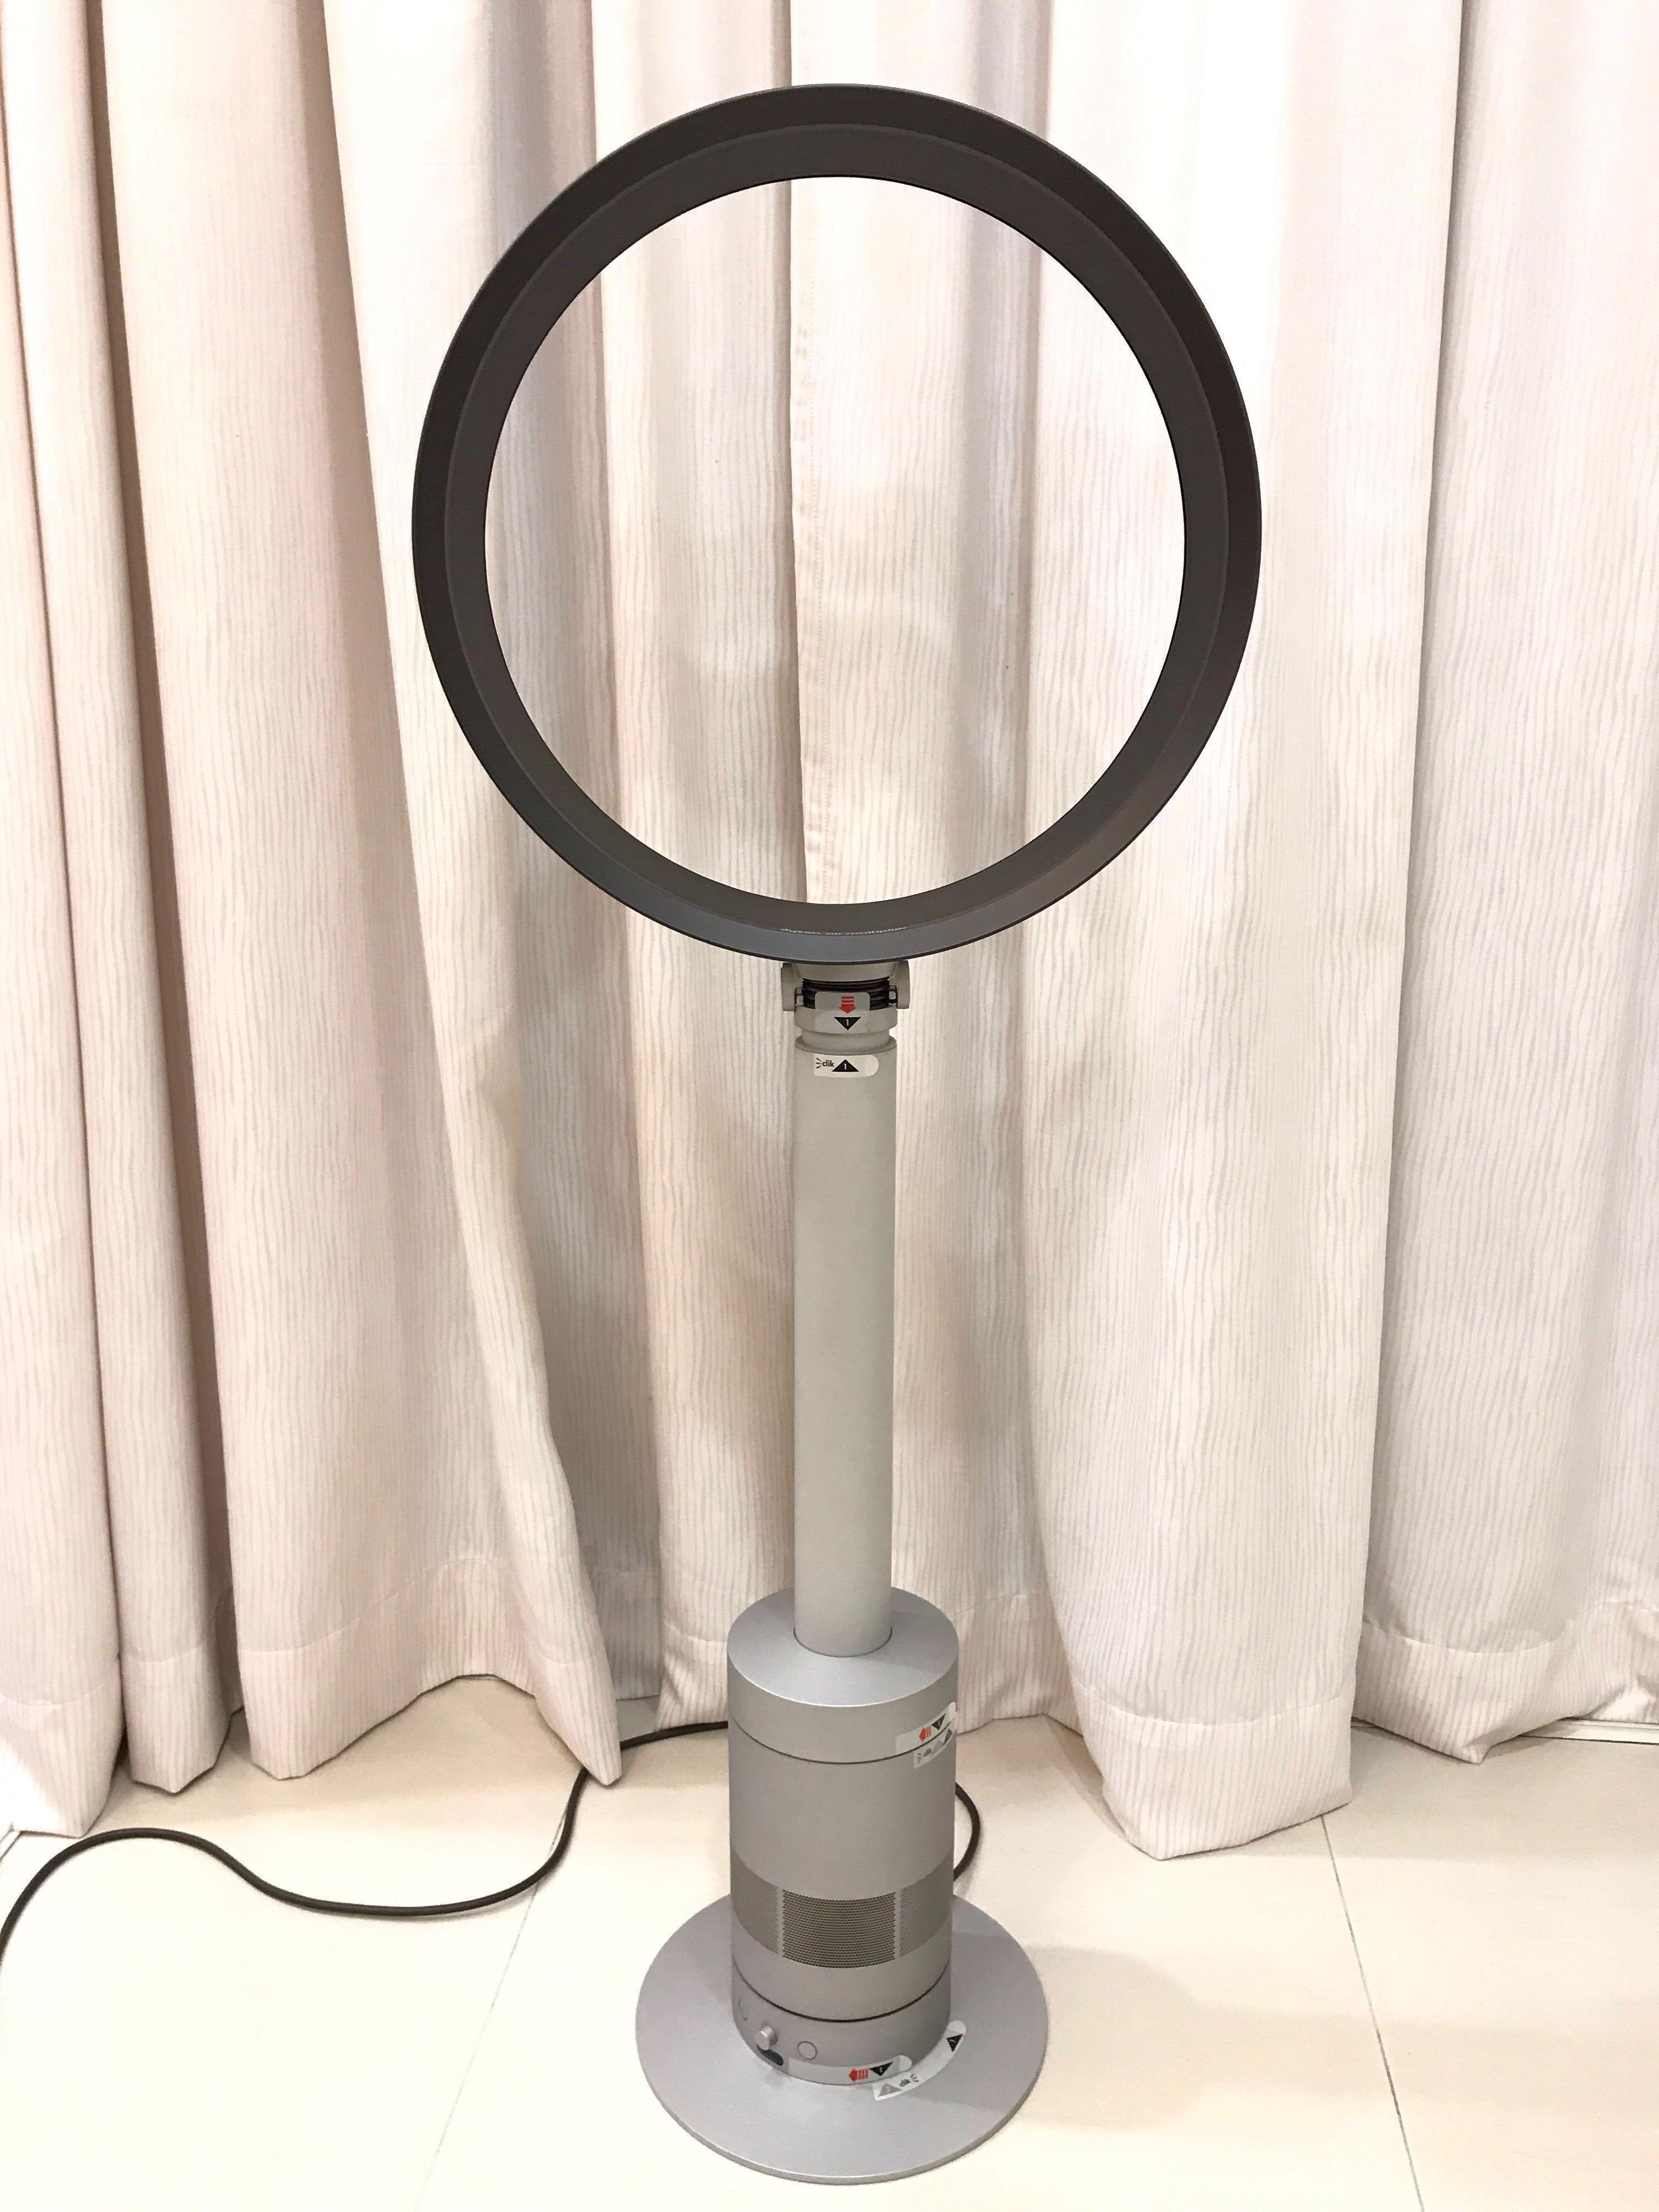 stand for dyson fan